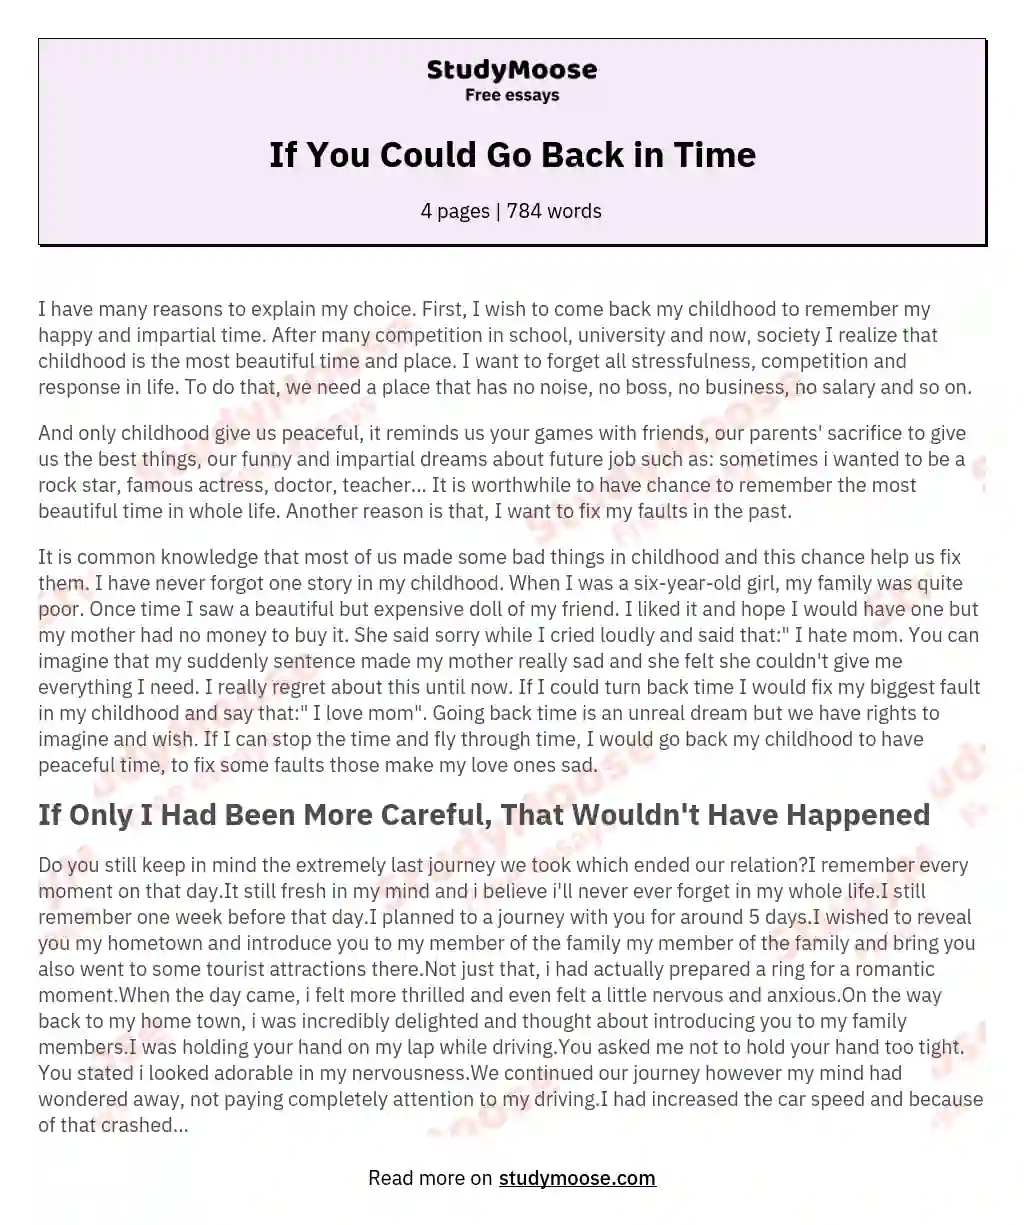 If You Could Go Back in Time essay